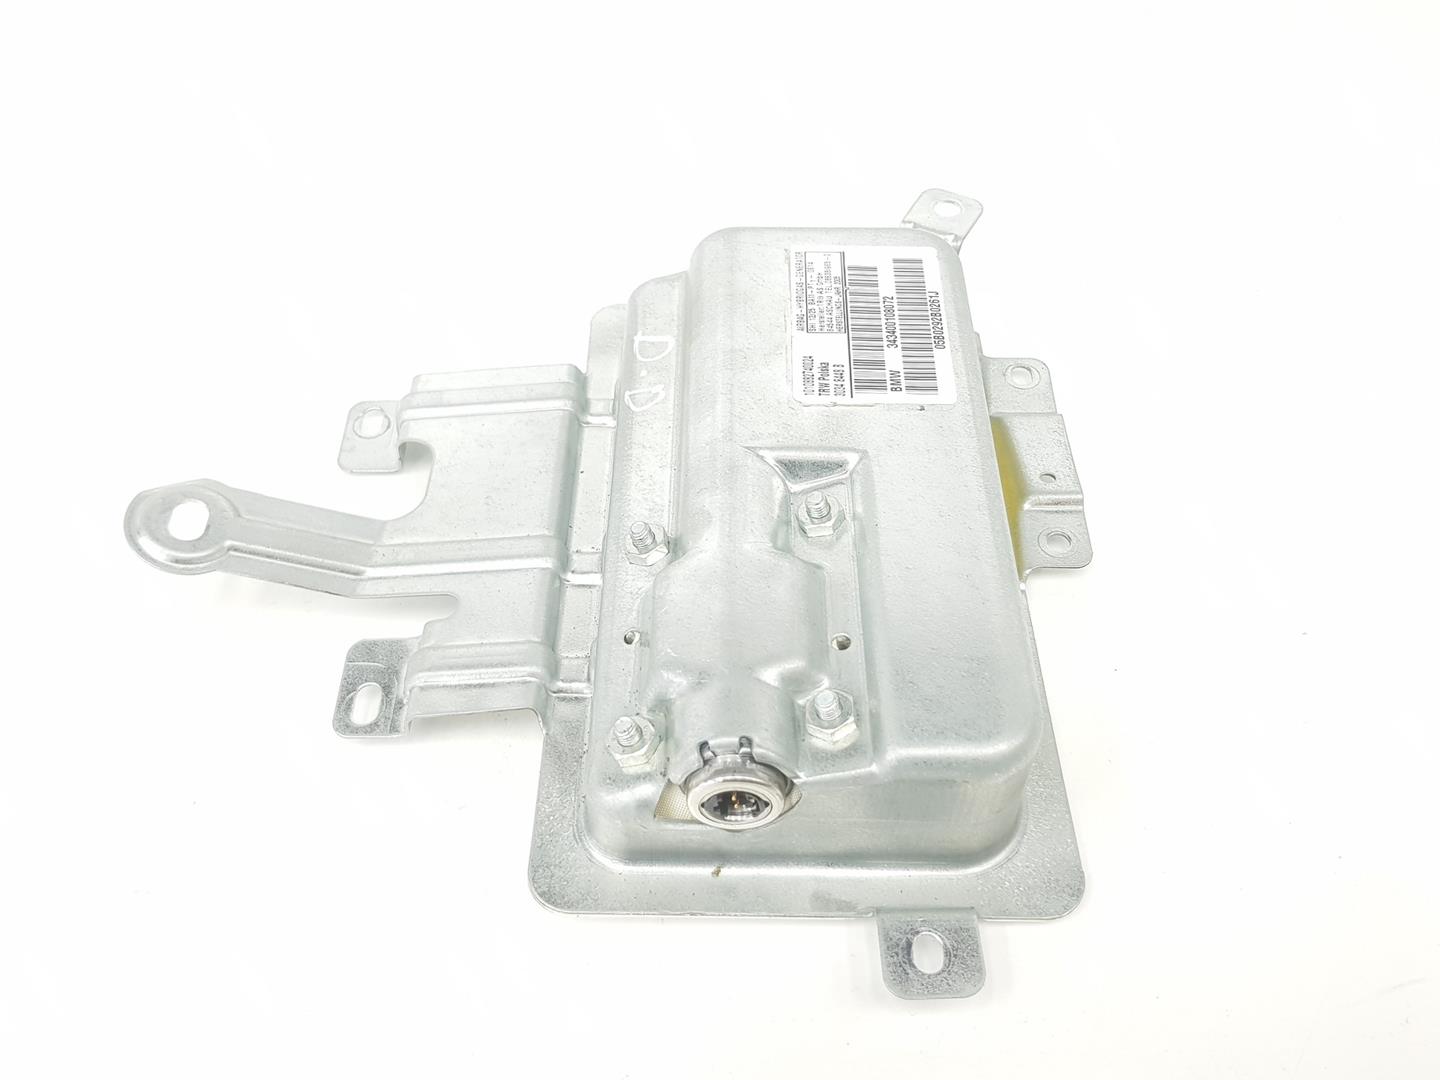 BMW X3 E83 (2003-2010) Front Right Door Airbag SRS 343400108072, 3427990 24976148